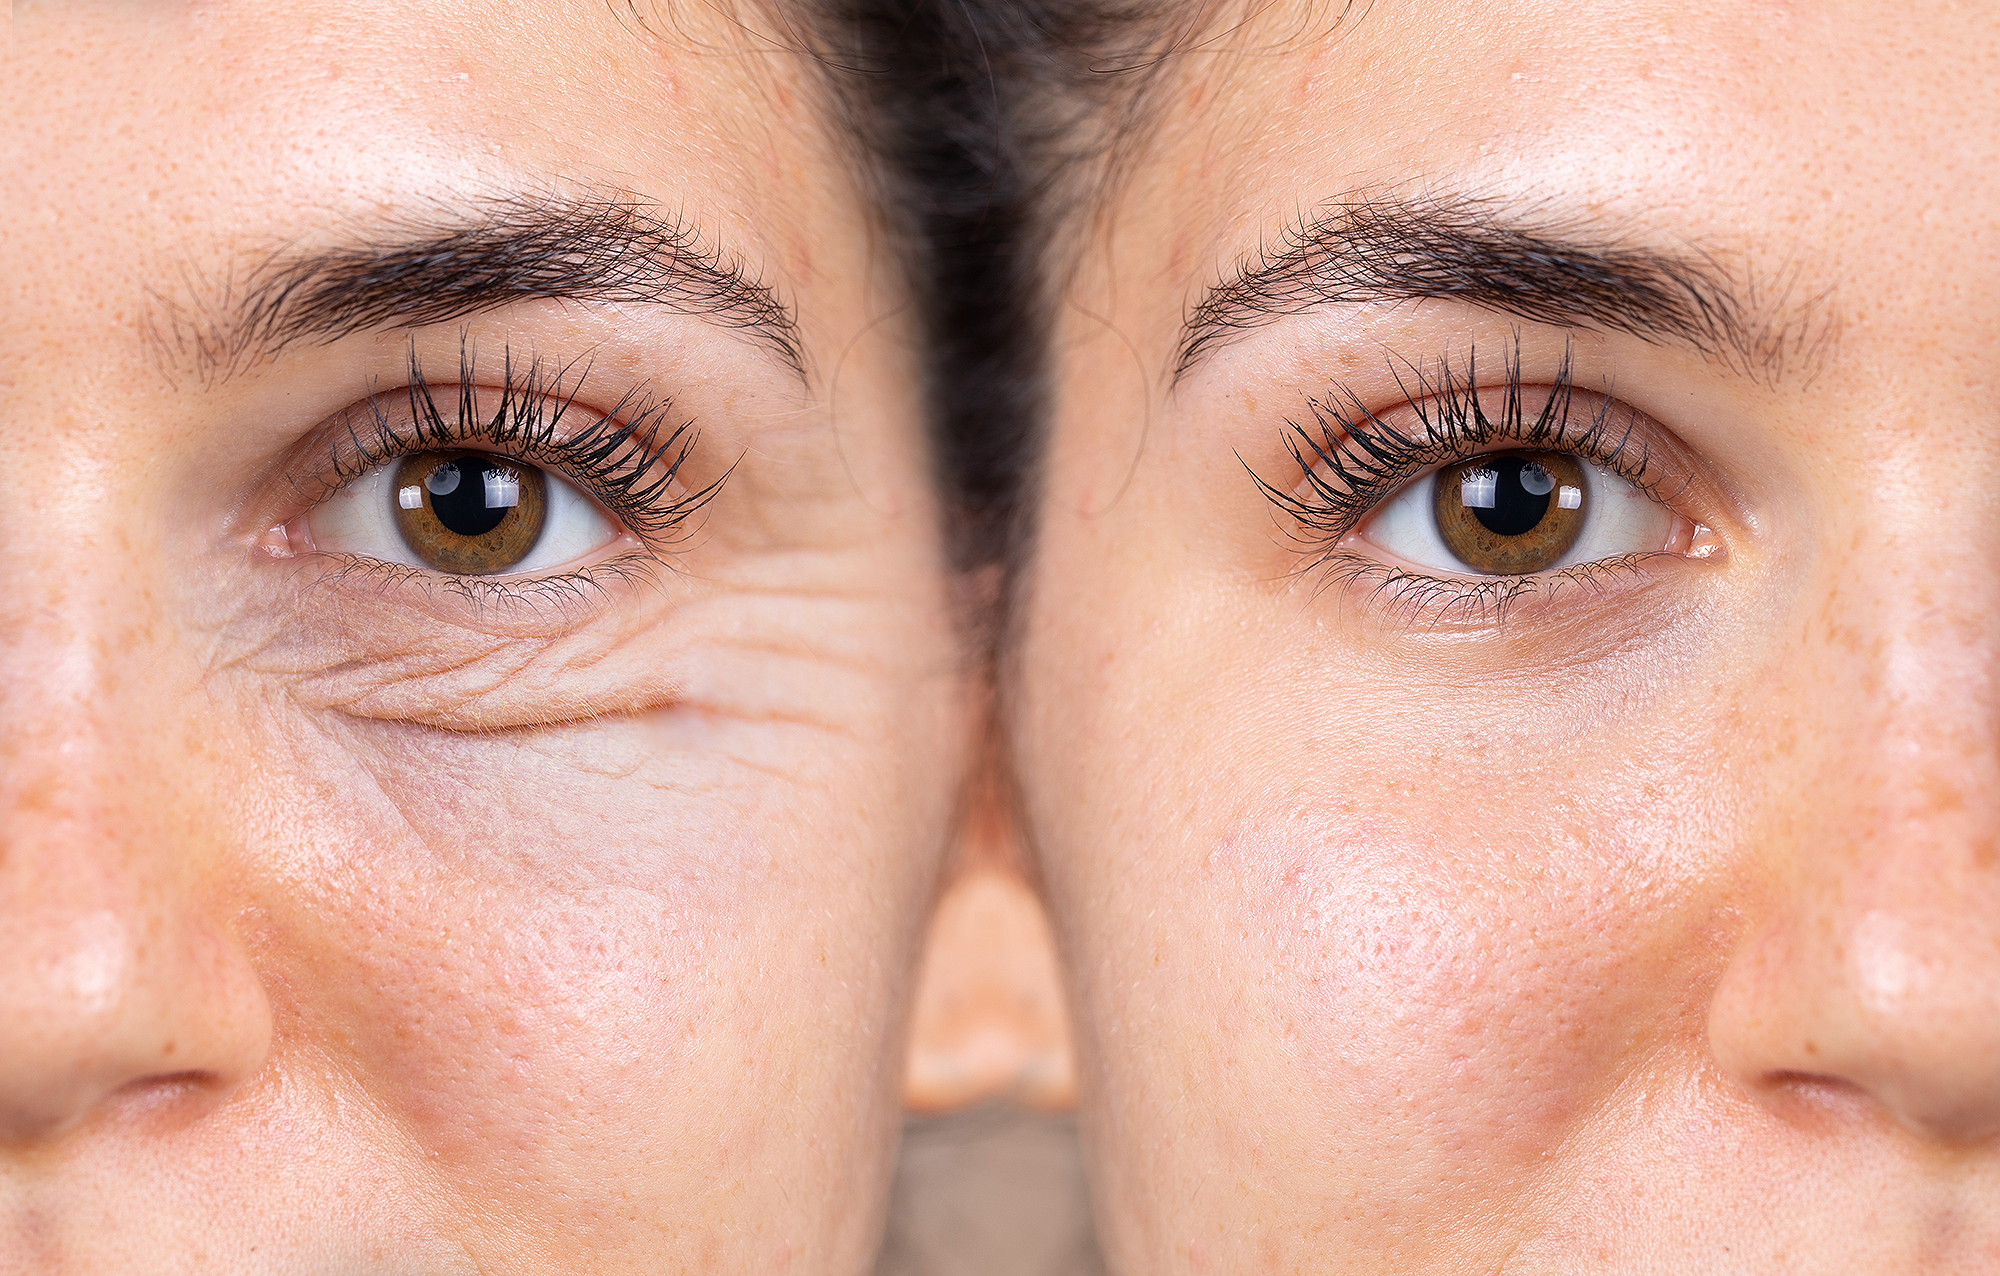 Wealthskin Anti-Aging Eye Cream Claims Results in 2 Minutes